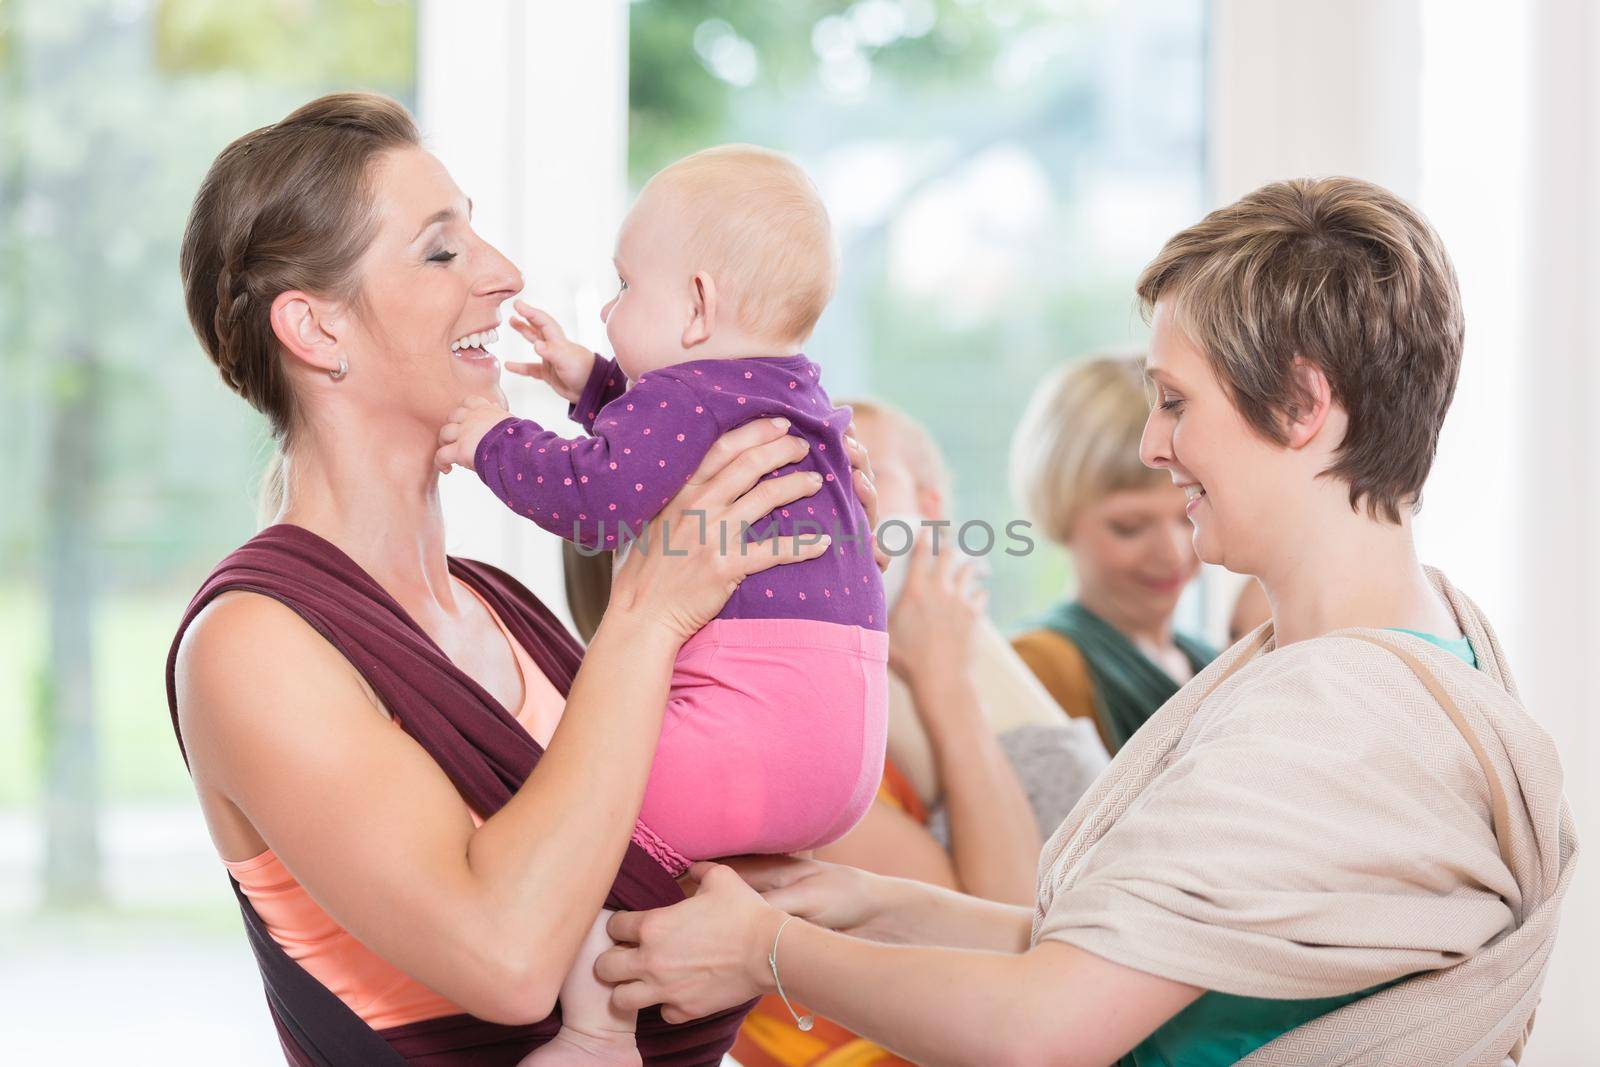 Young women learn how to use baby carriers for carrying children by Kzenon